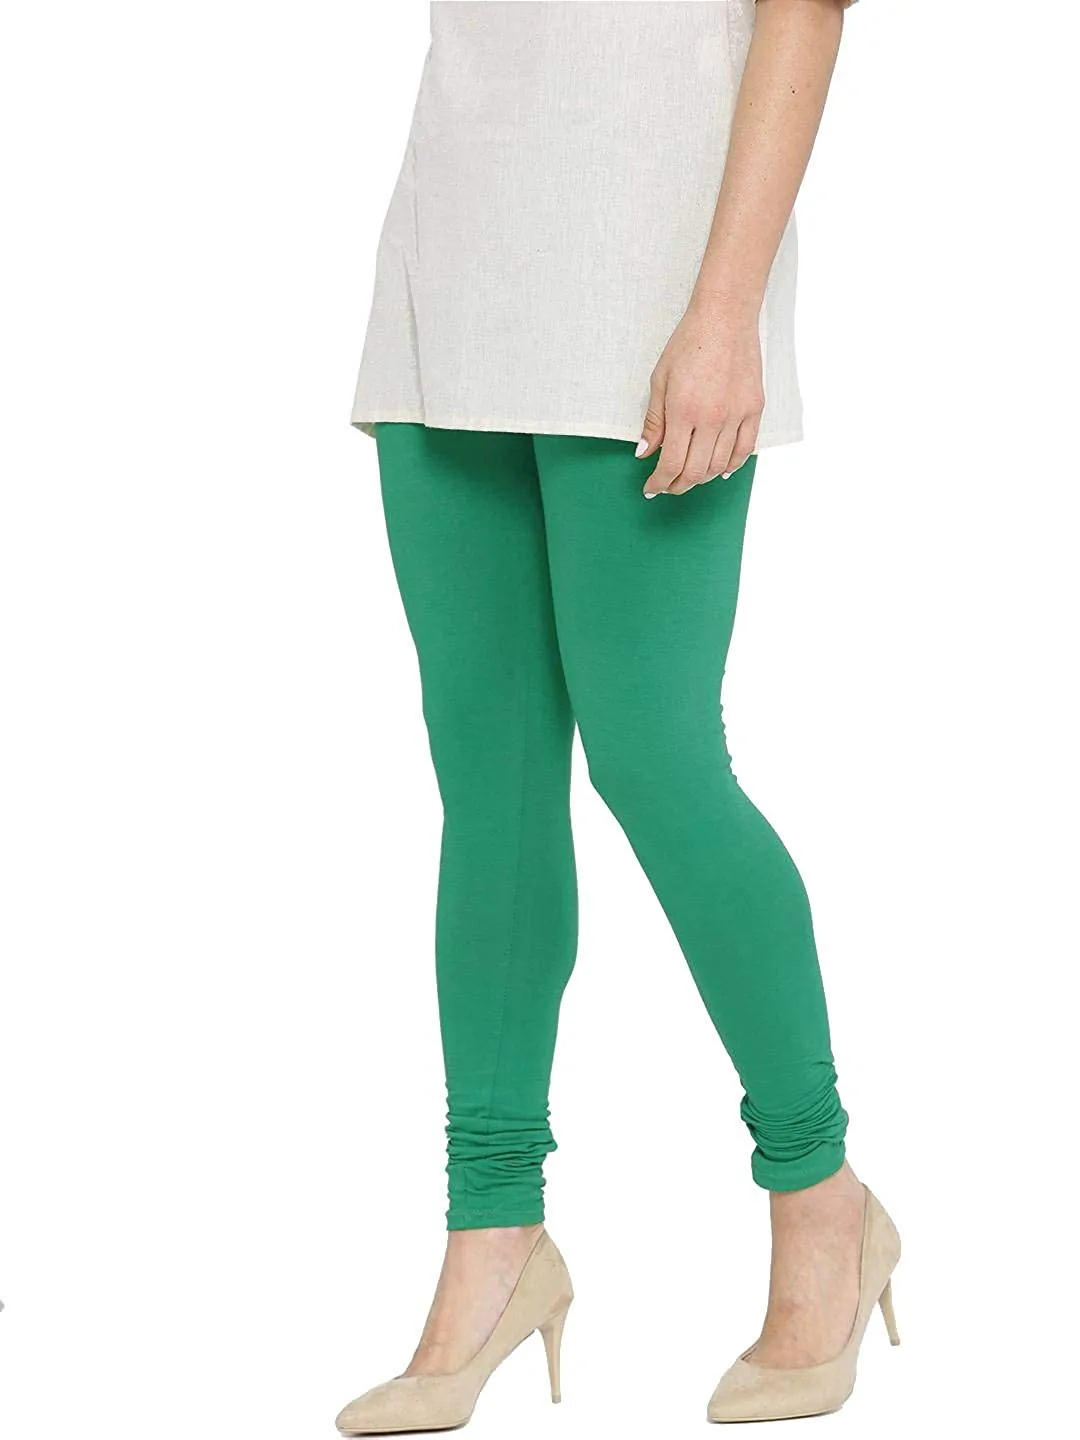 Buy Comfort Lady Super Stretchable Cotton Elasthane Fabric Ankle Length  Churidar Leggings for Women - Free Size (Pack of 2) (Beige & Aqua Green) at  Amazon.in